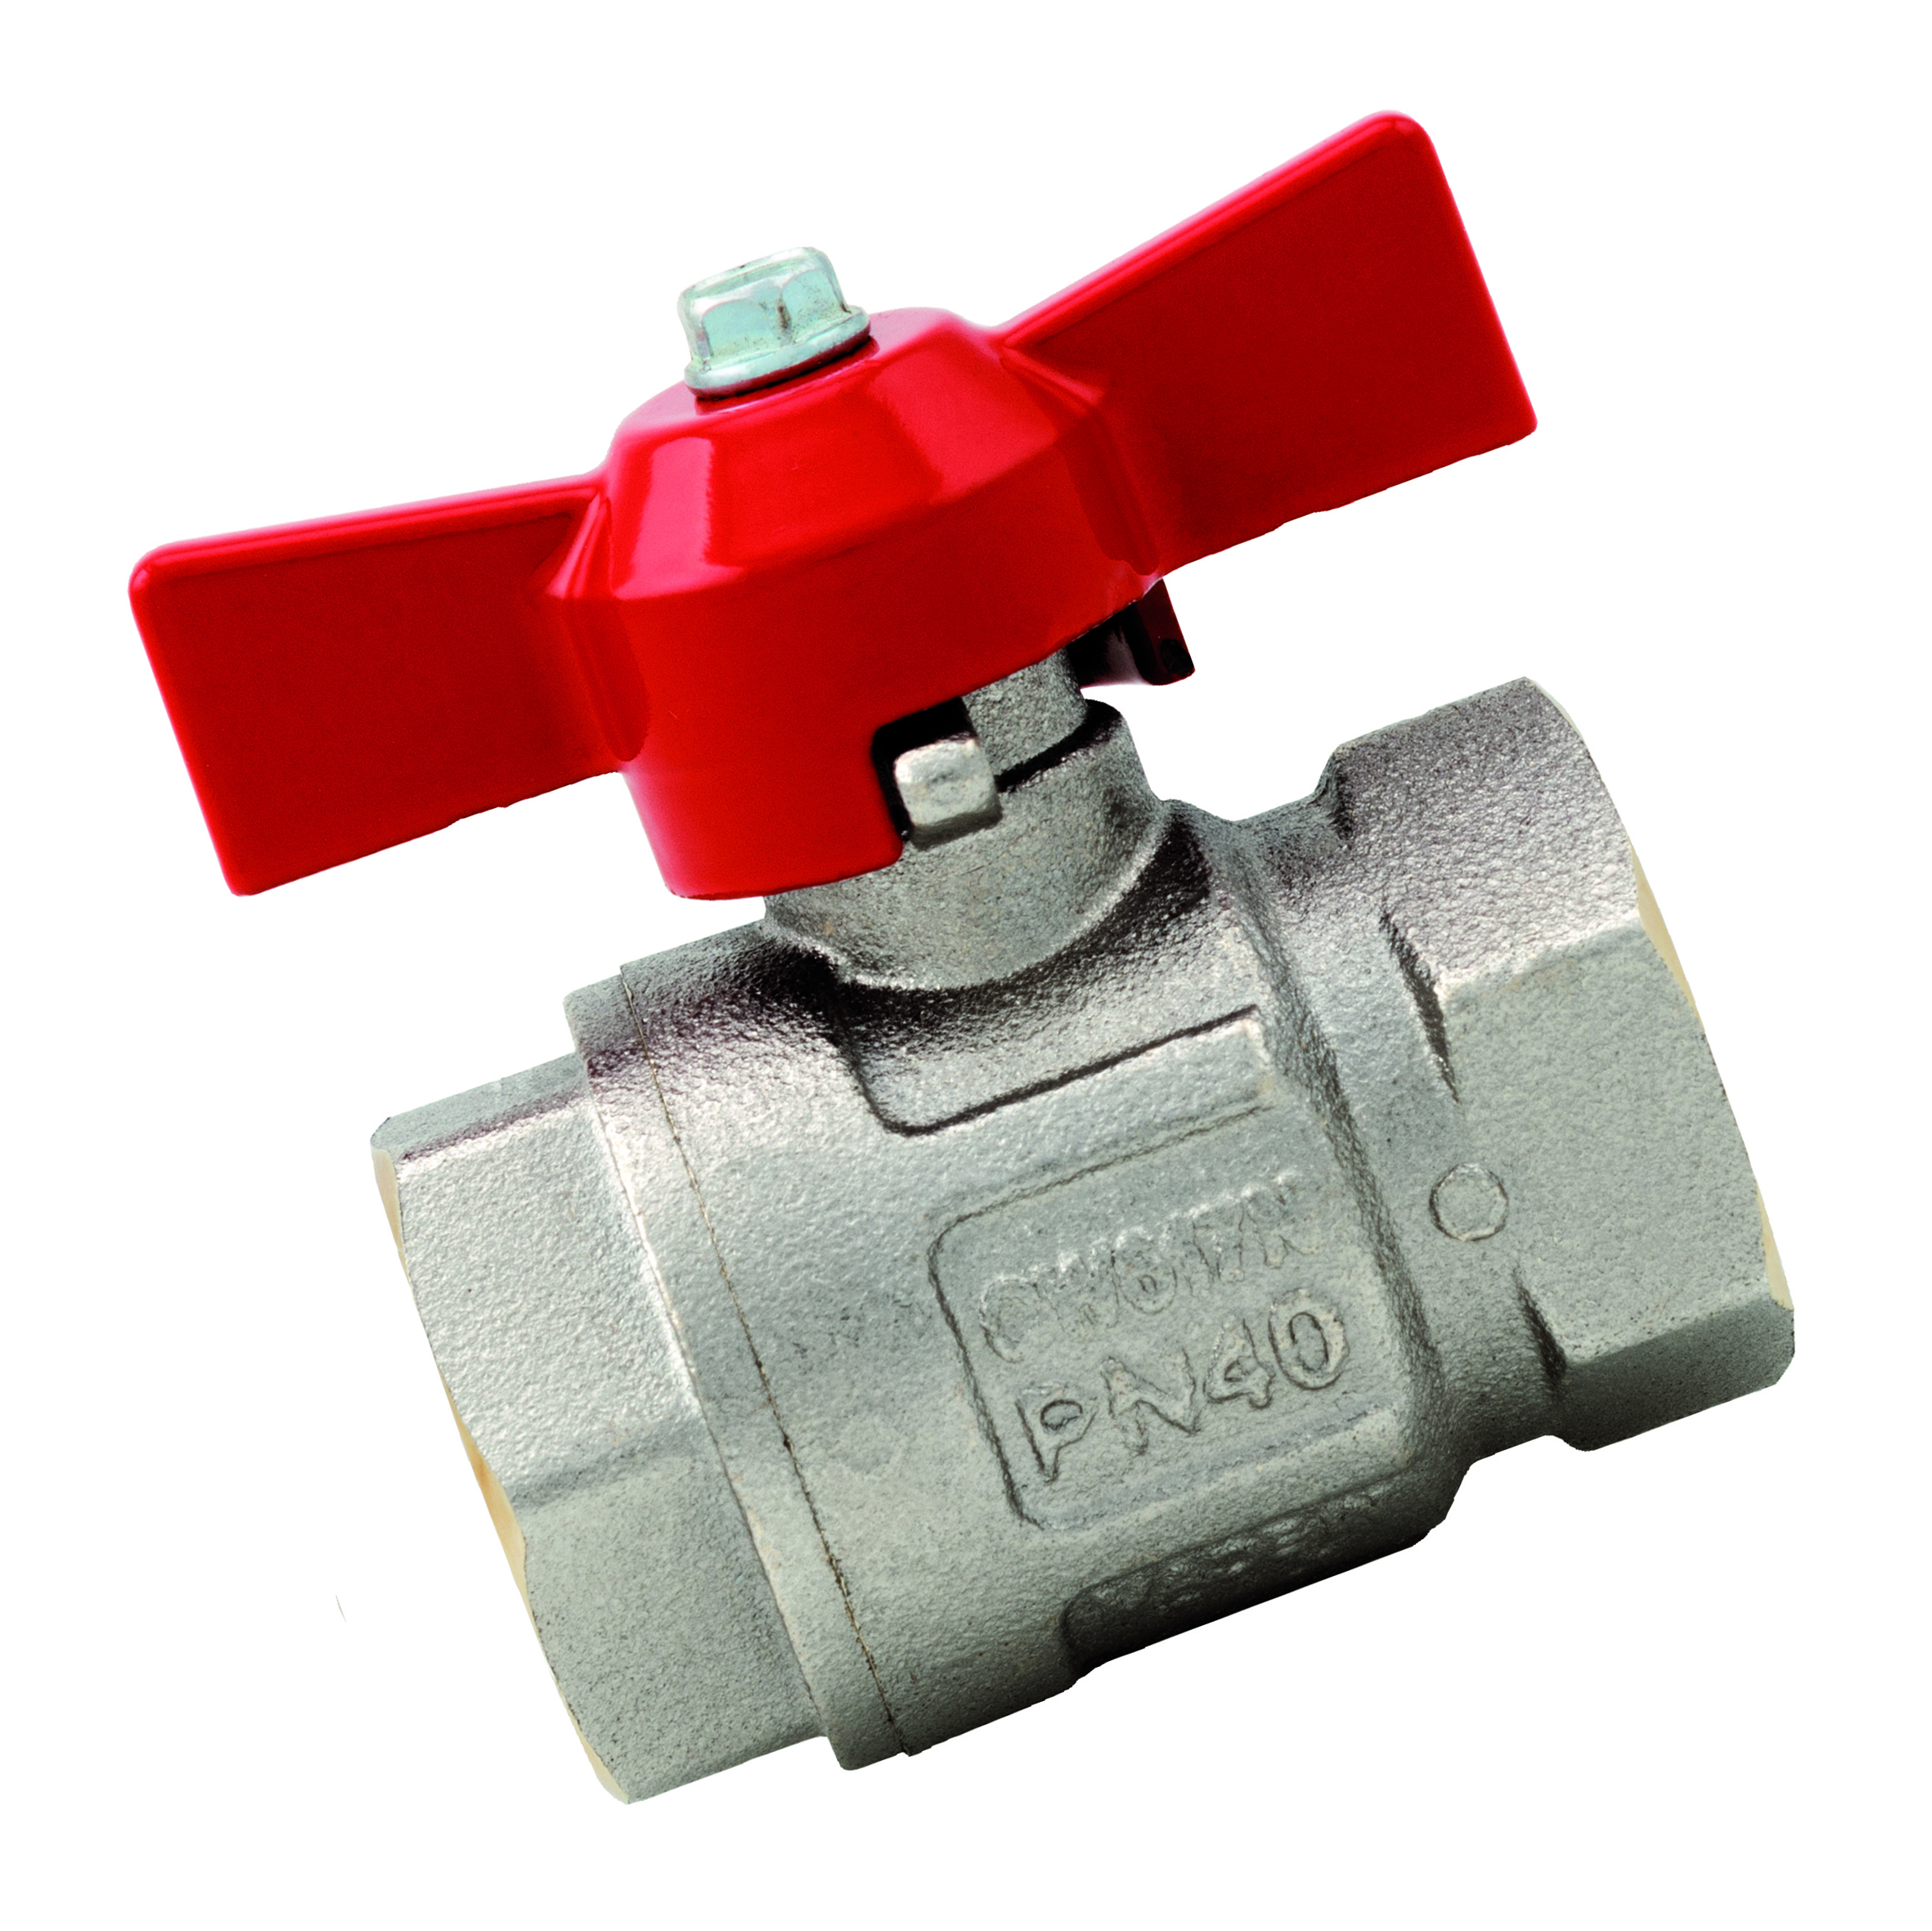 1/4" Brass Ball Valve Wing Handle Ni Plated